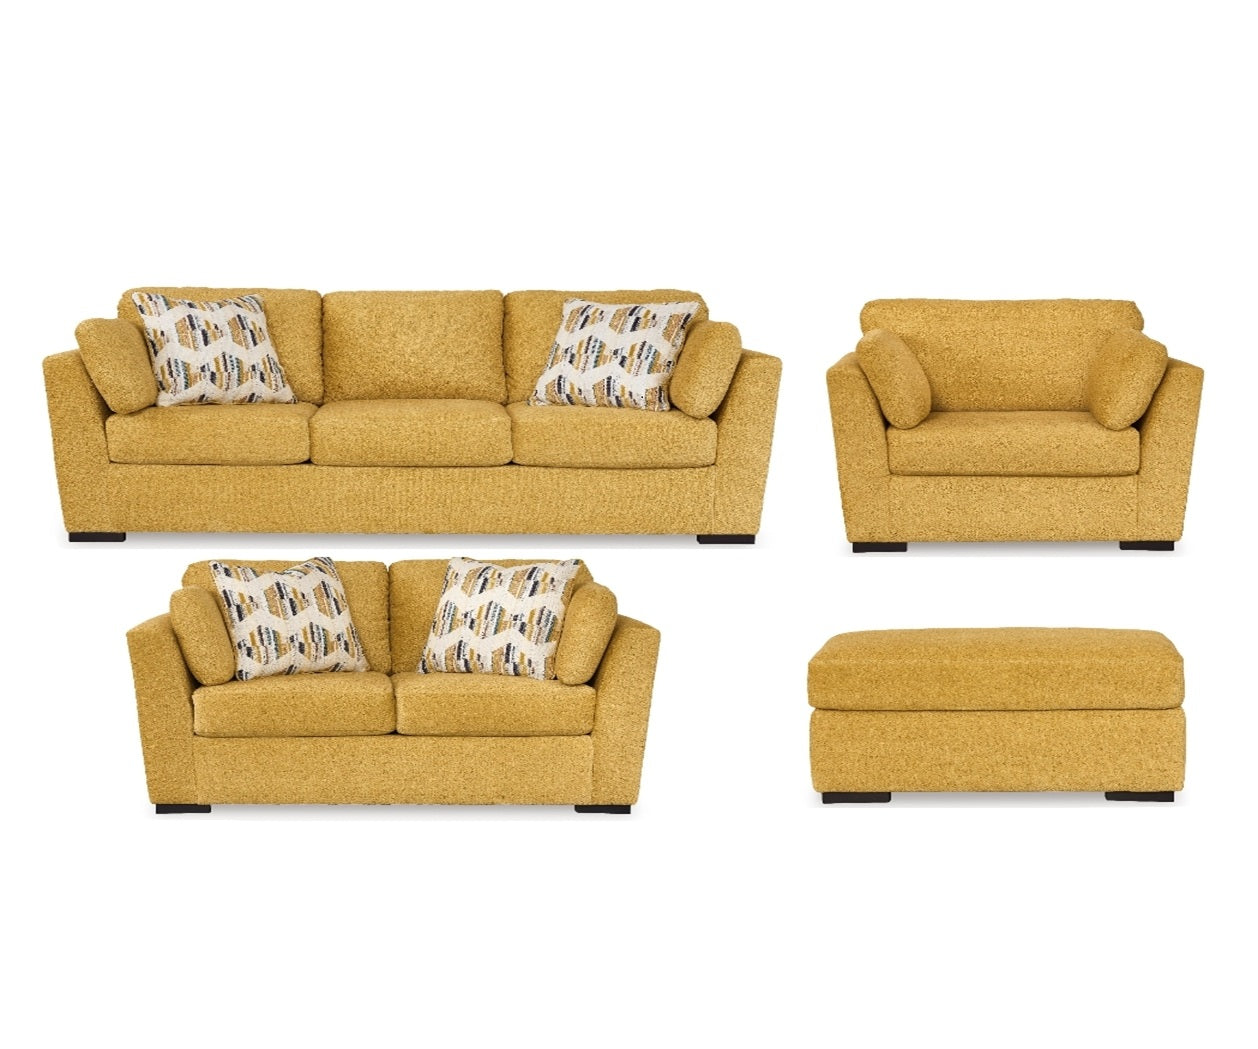 Clareen Upholstered Living Room Collection